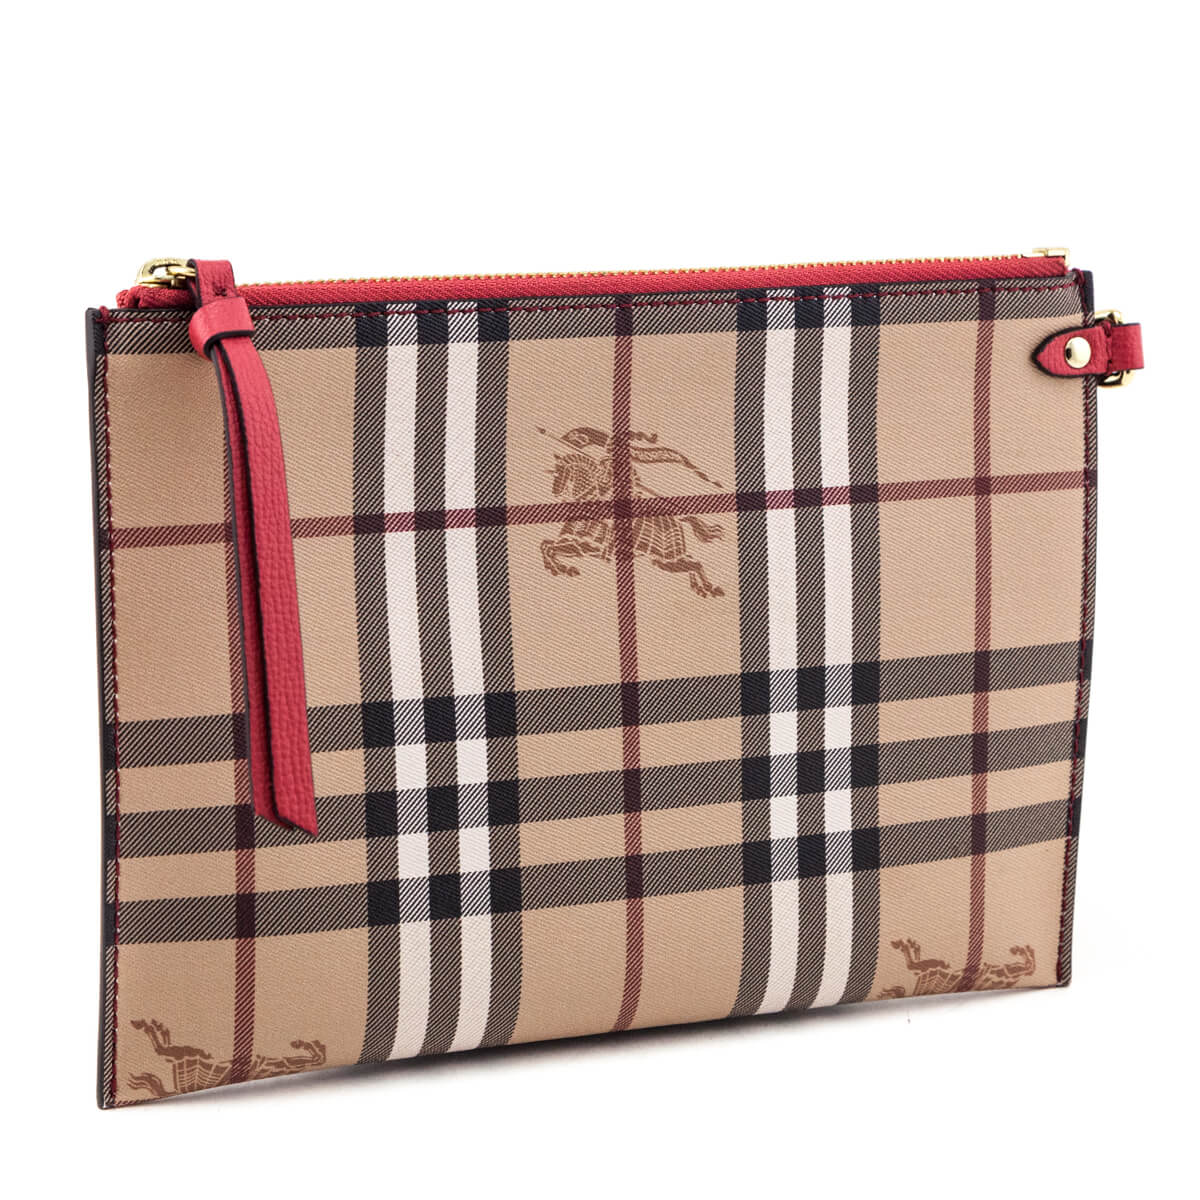 Burberry Haymarket Check Red Calfskin Pouch - Love that Bag etc - Preowned Authentic Designer Handbags & Preloved Fashions